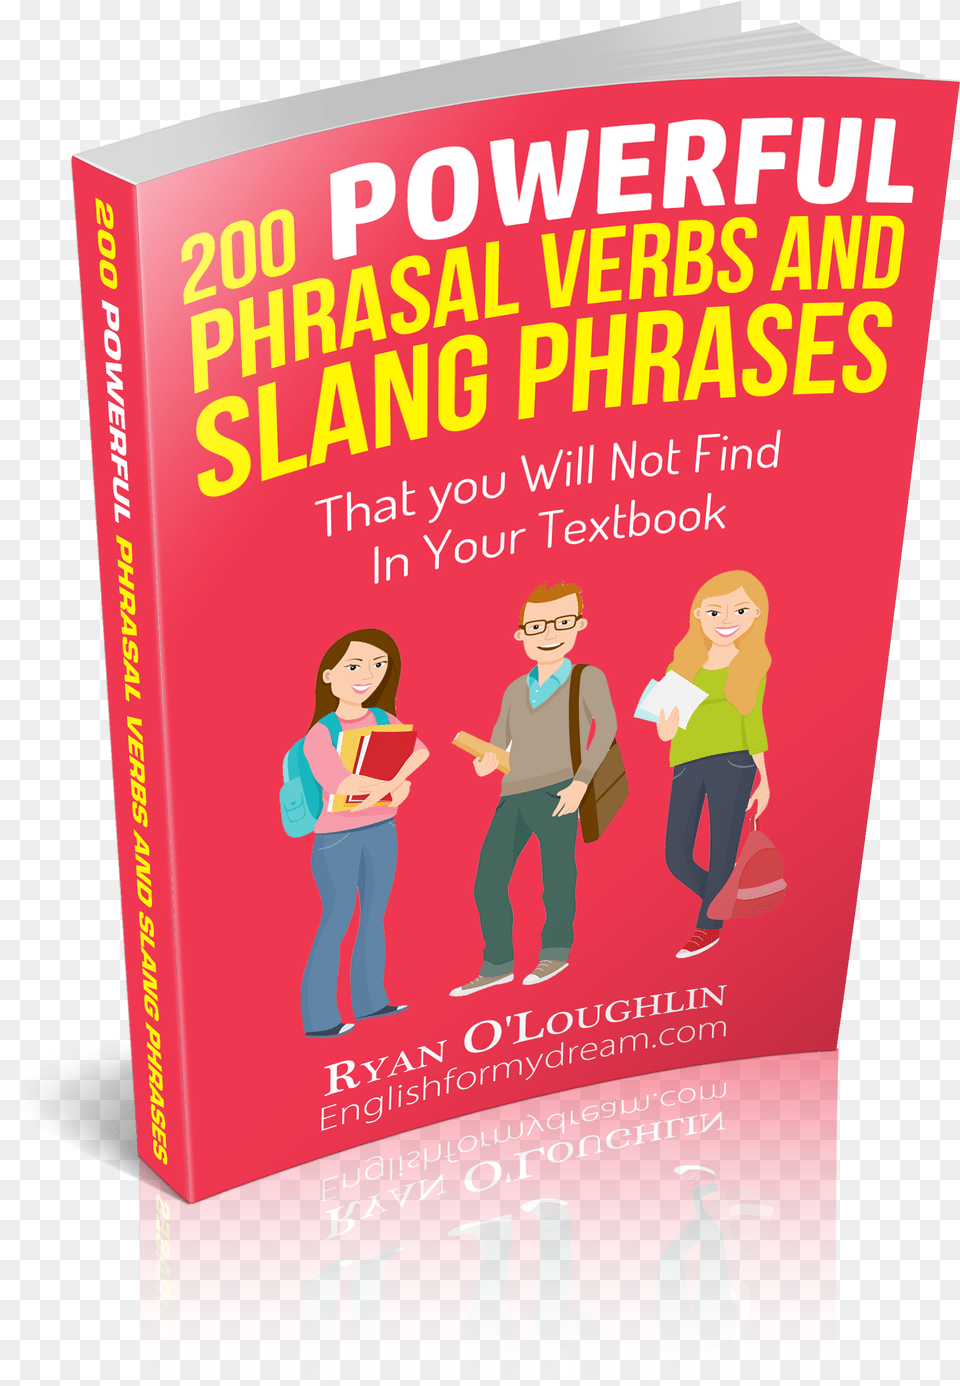 Powerful Phrasal Verbs And Slang Phrases That You Phrasal Verbs Books Pdf, Advertisement, Book, Publication, Poster Png